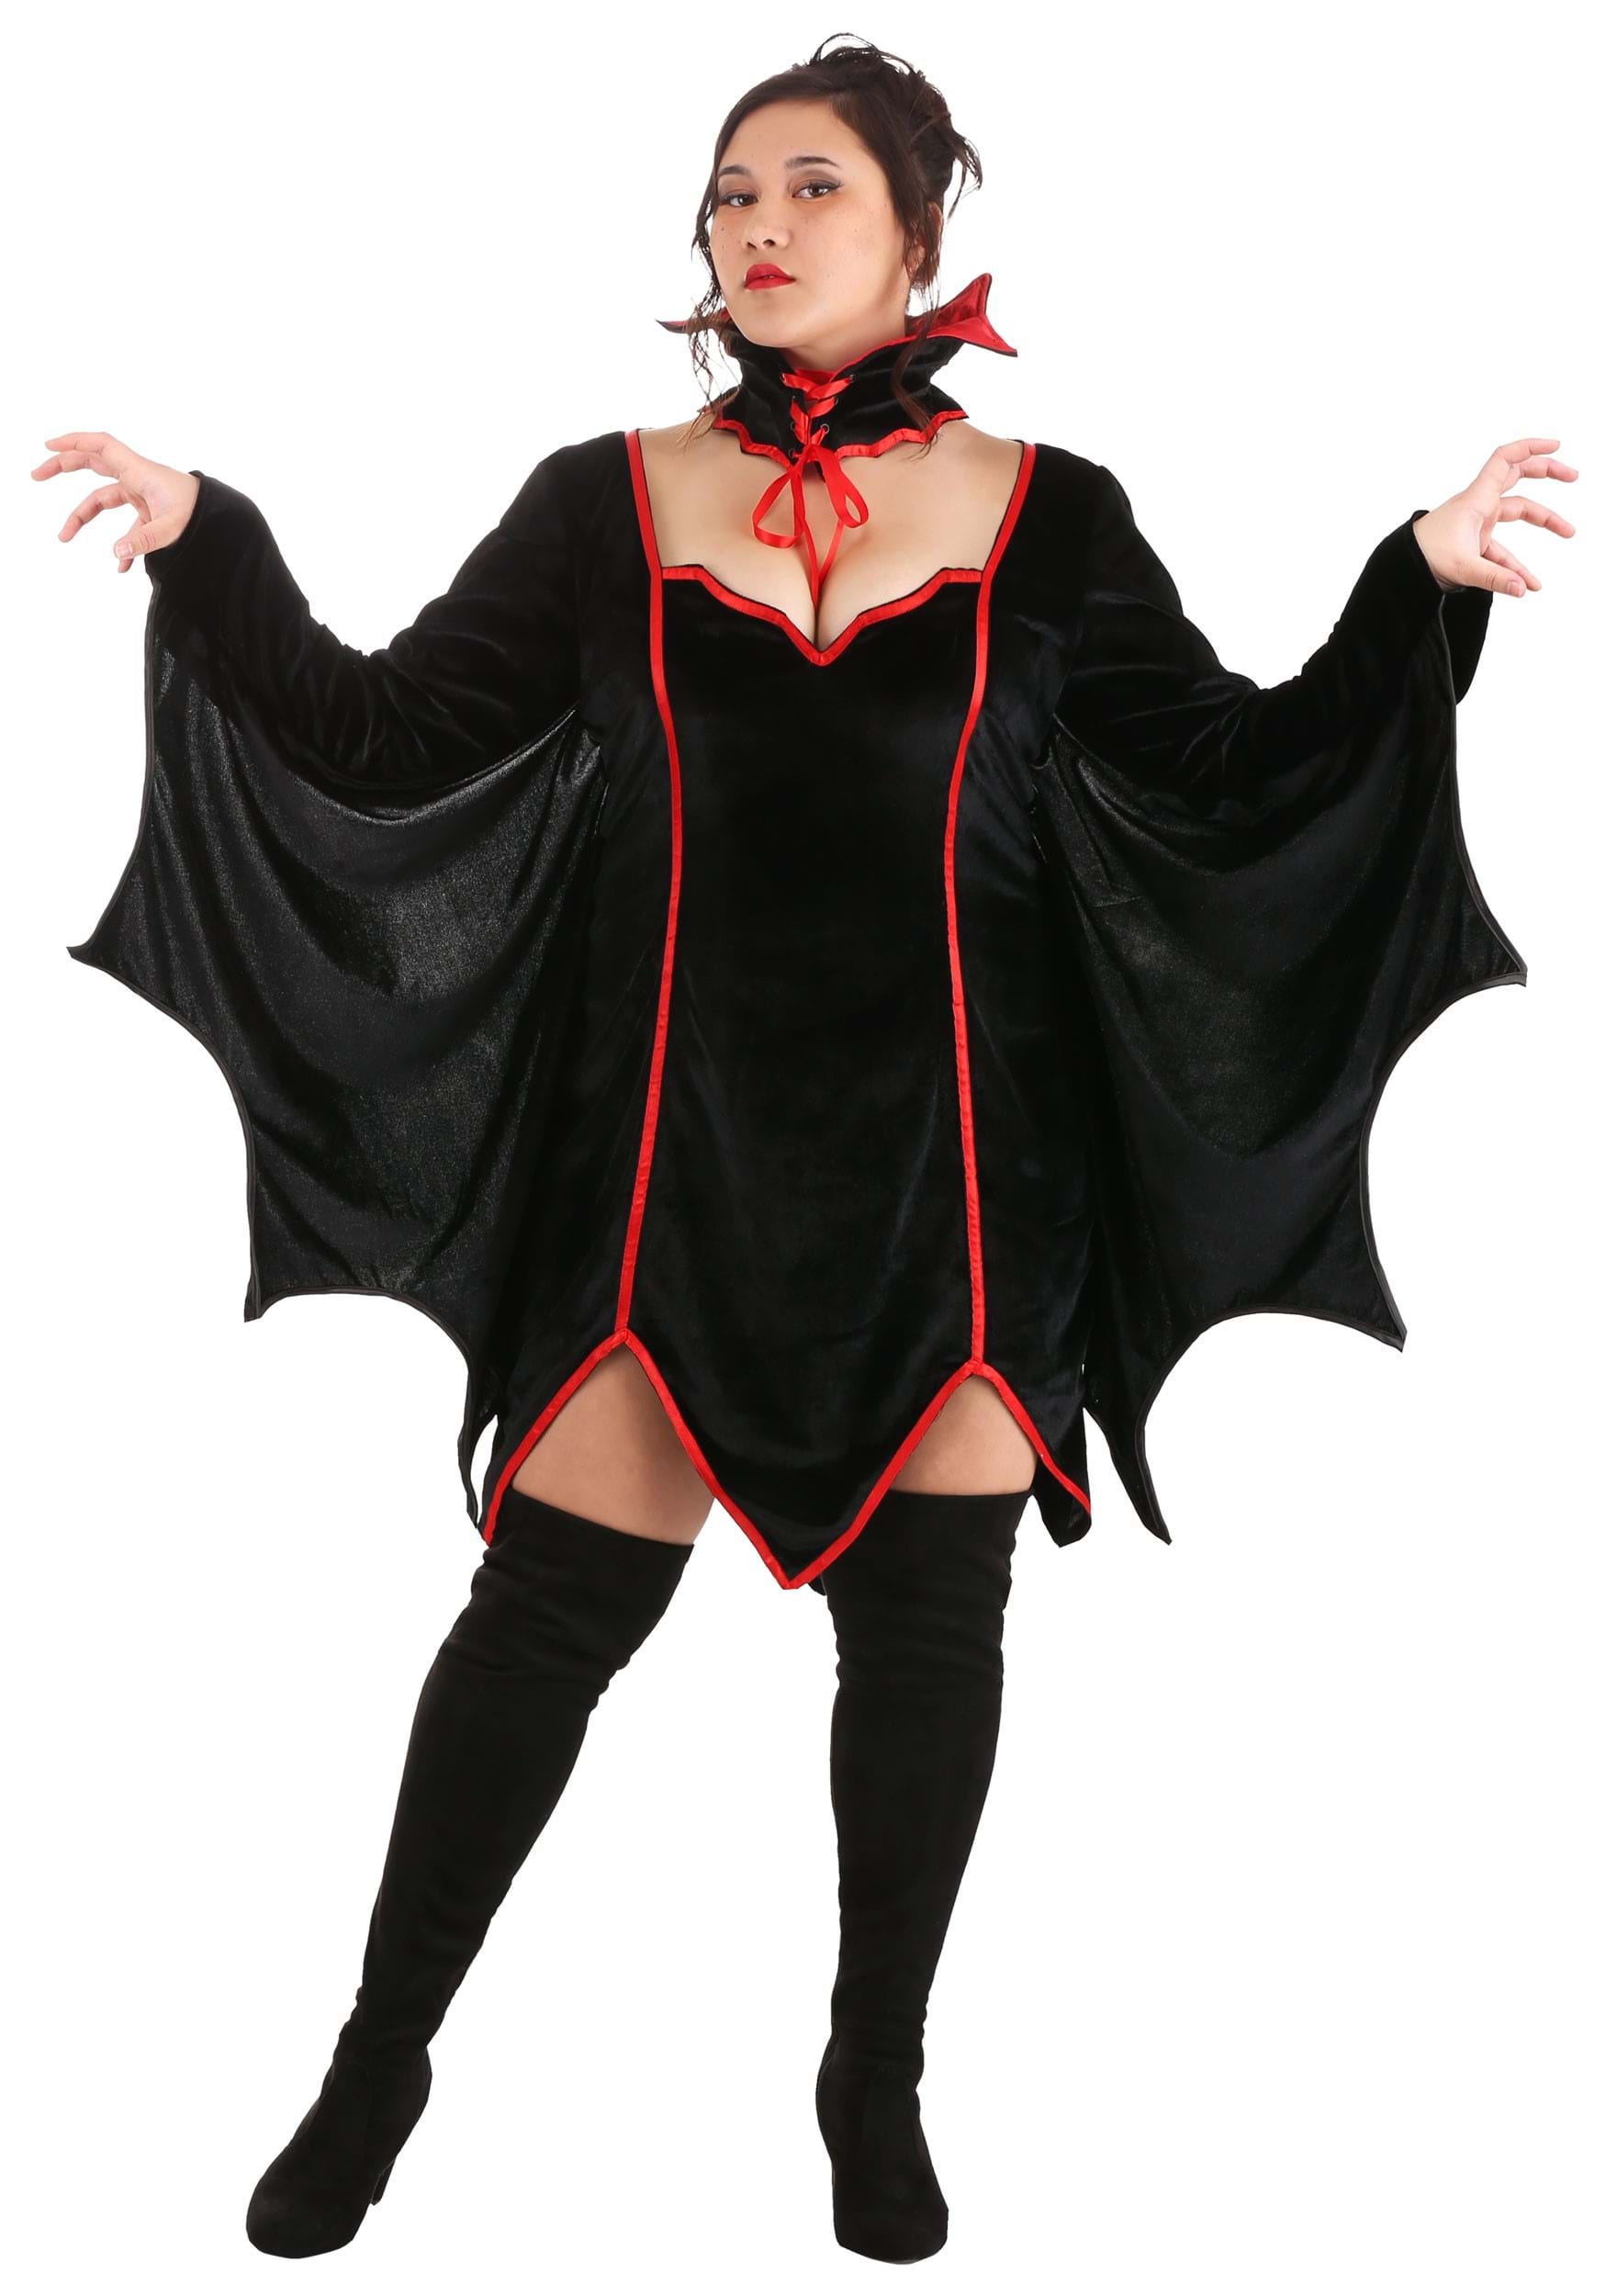 Photos - Fancy Dress FUN Costumes Plus Size Women's Lady Dracula Costume | Scary Plus Size Cost